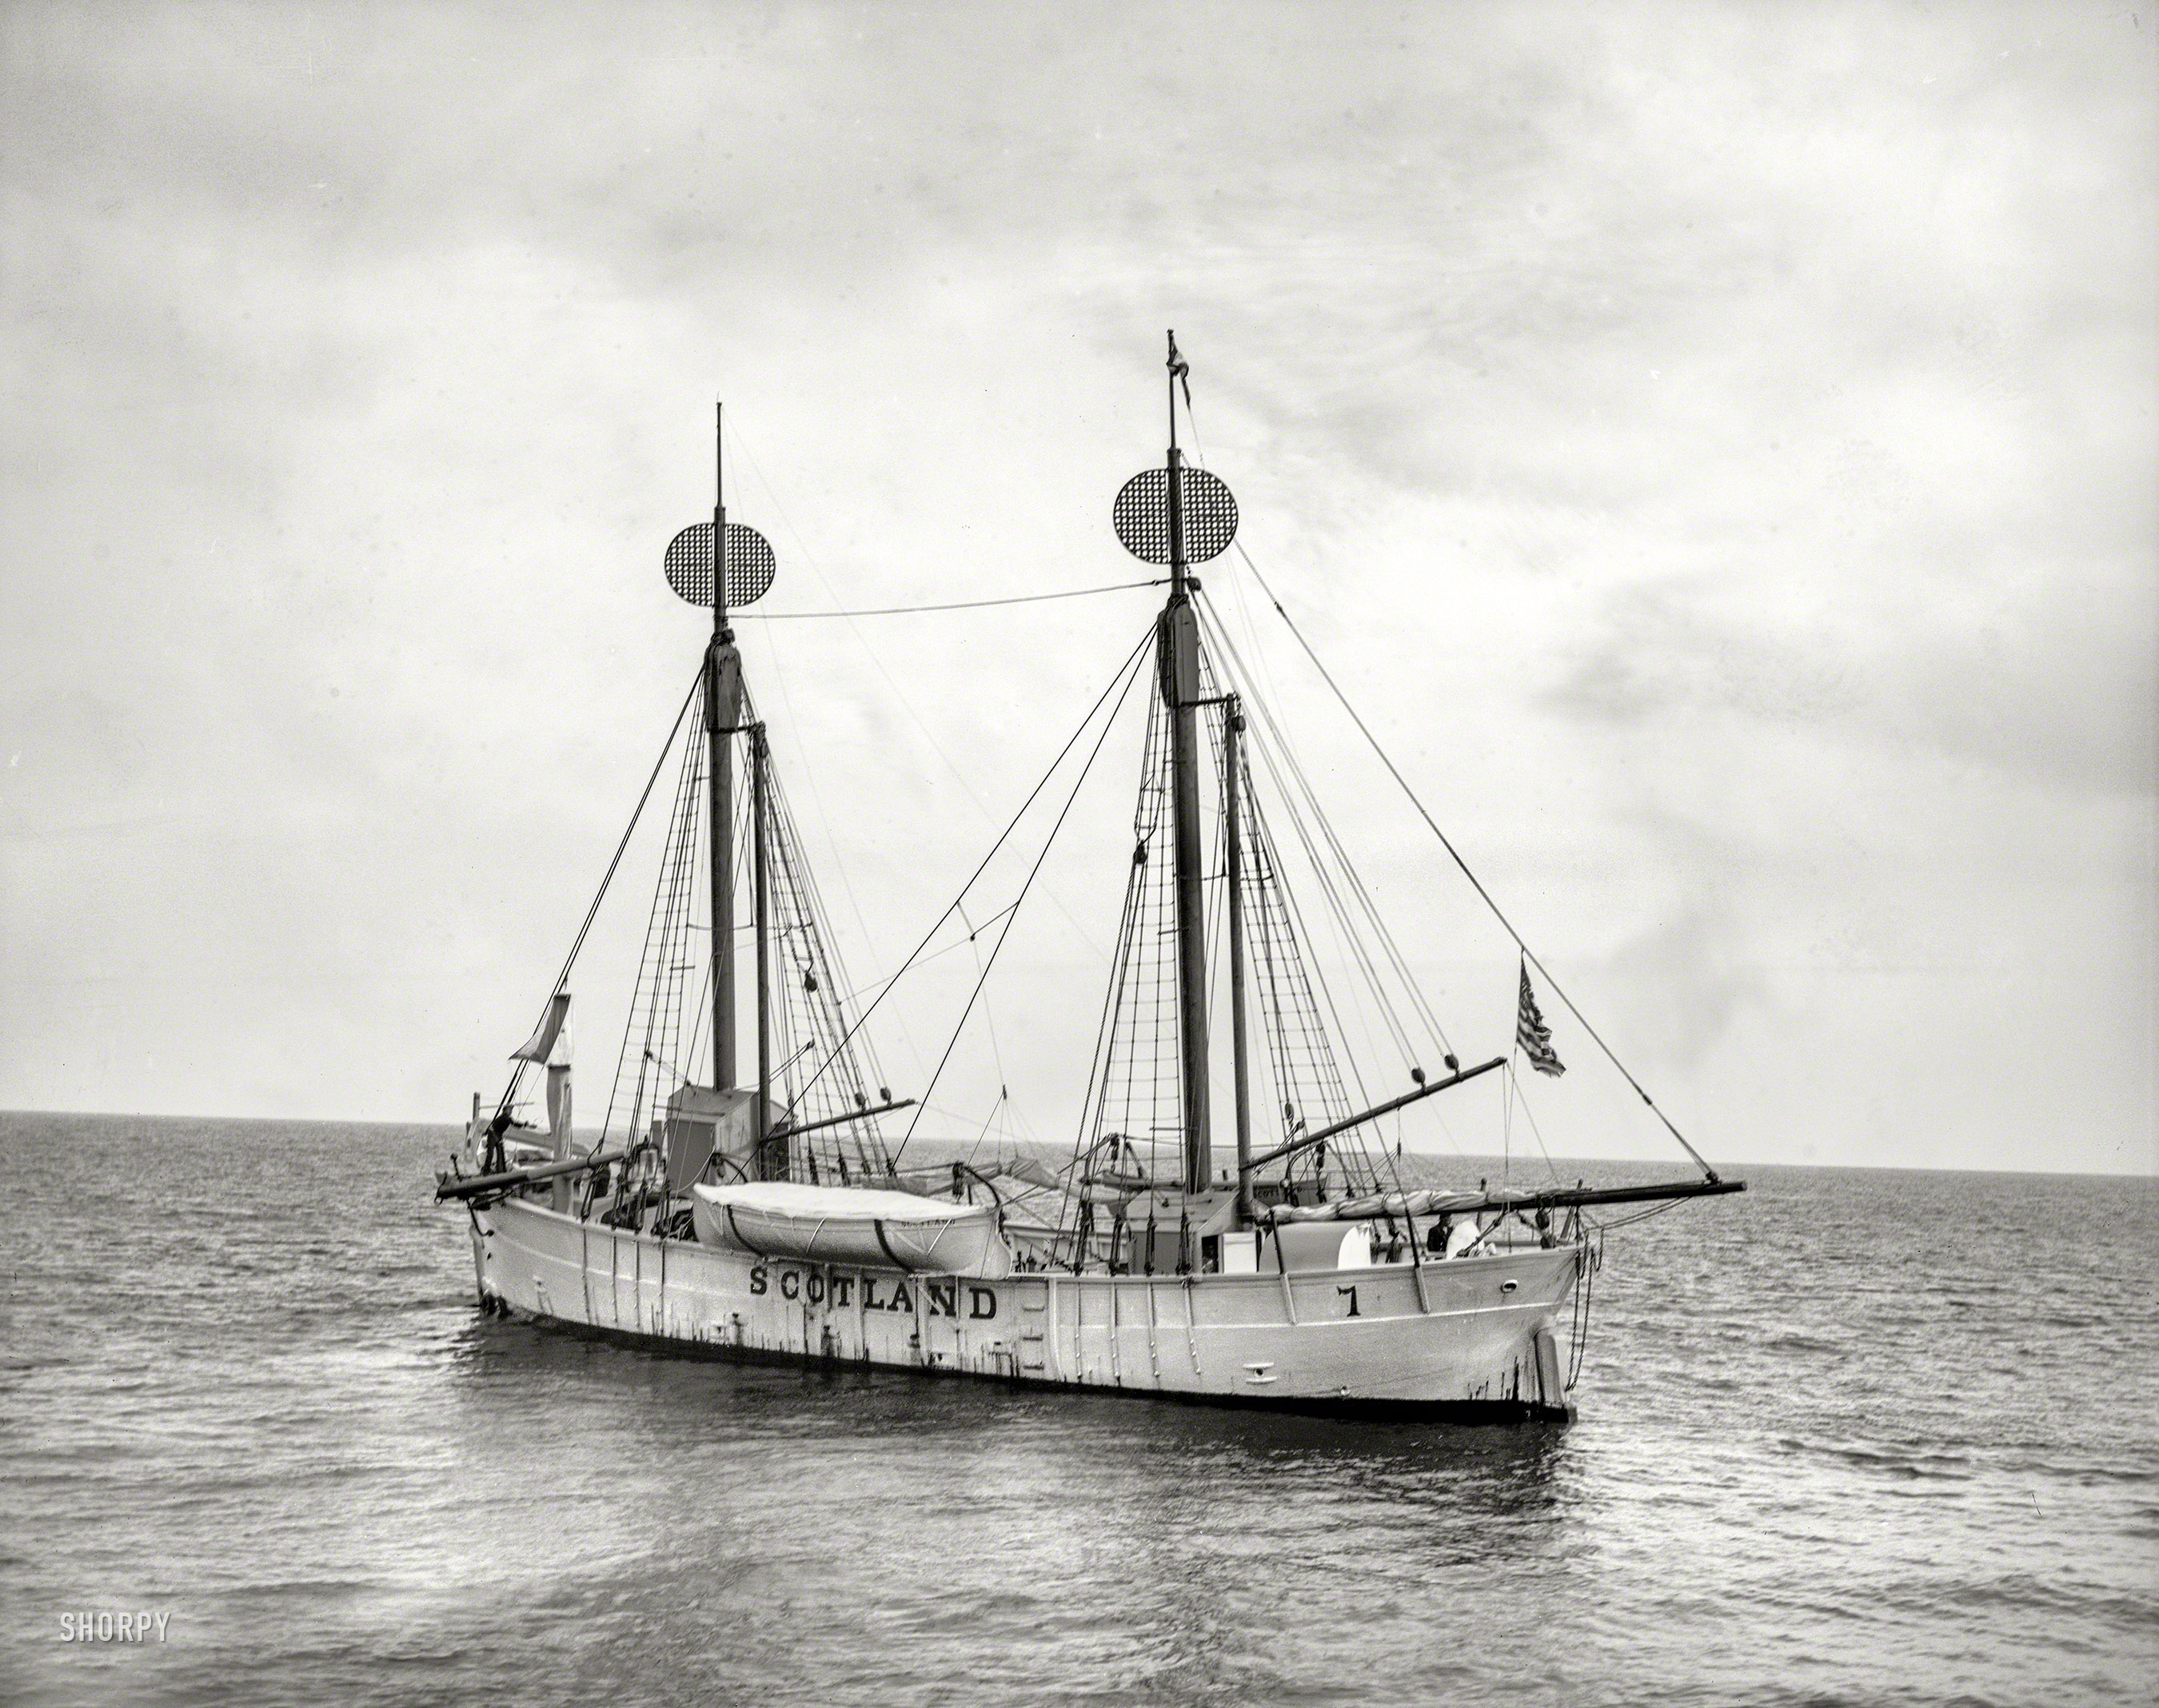 1896. "Lightship Scotland." 8x10 inch dry plate glass negative, Detroit Photographic Company. View full size.